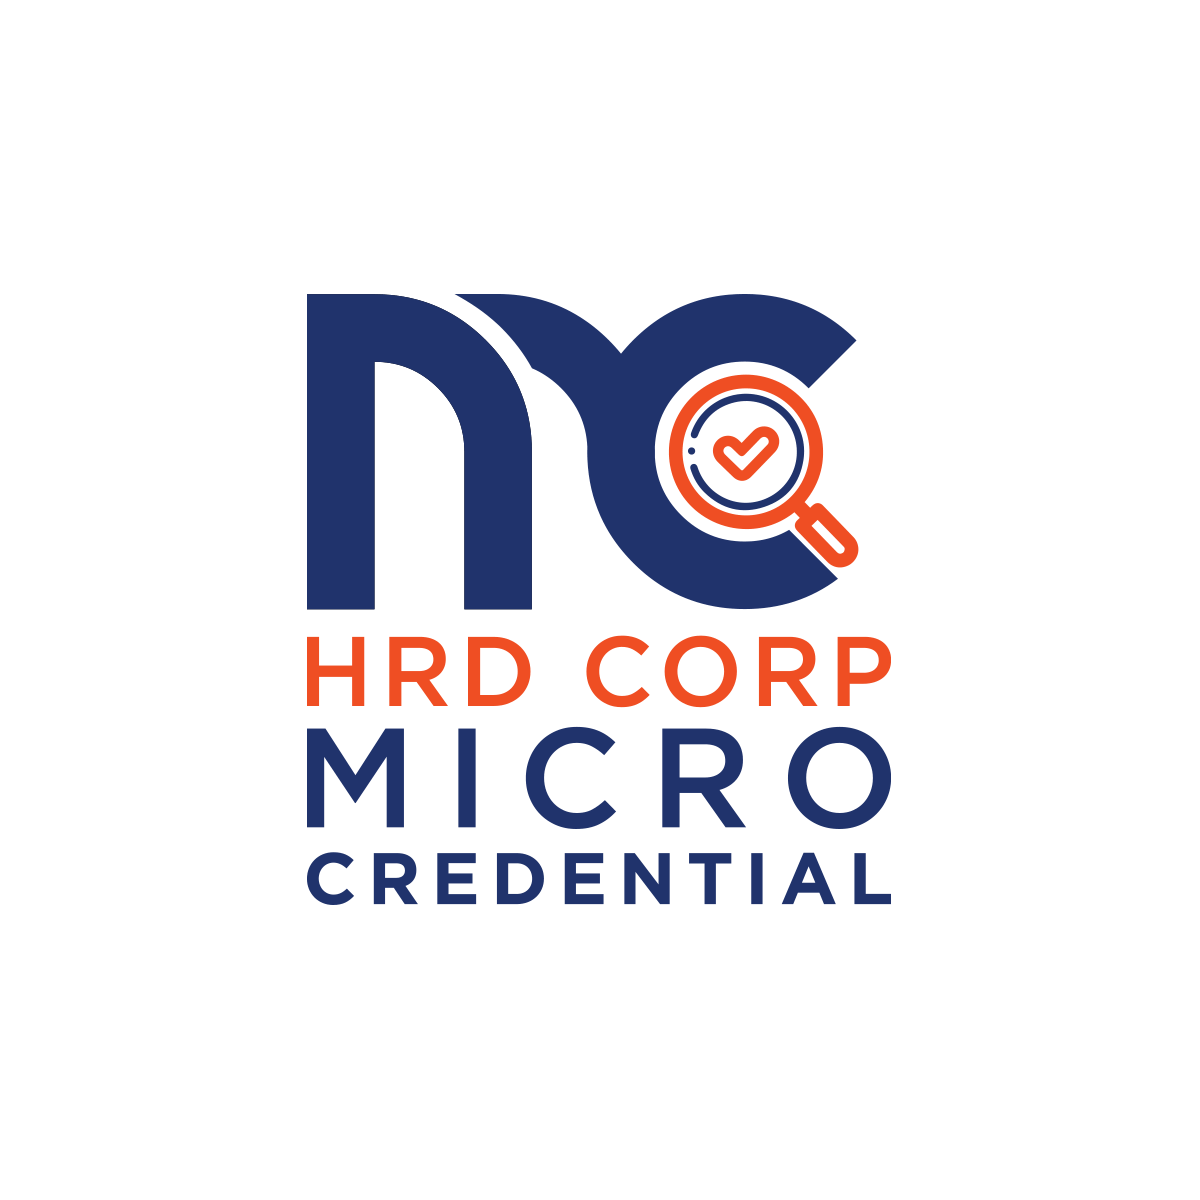 HRD Corp Microcredential